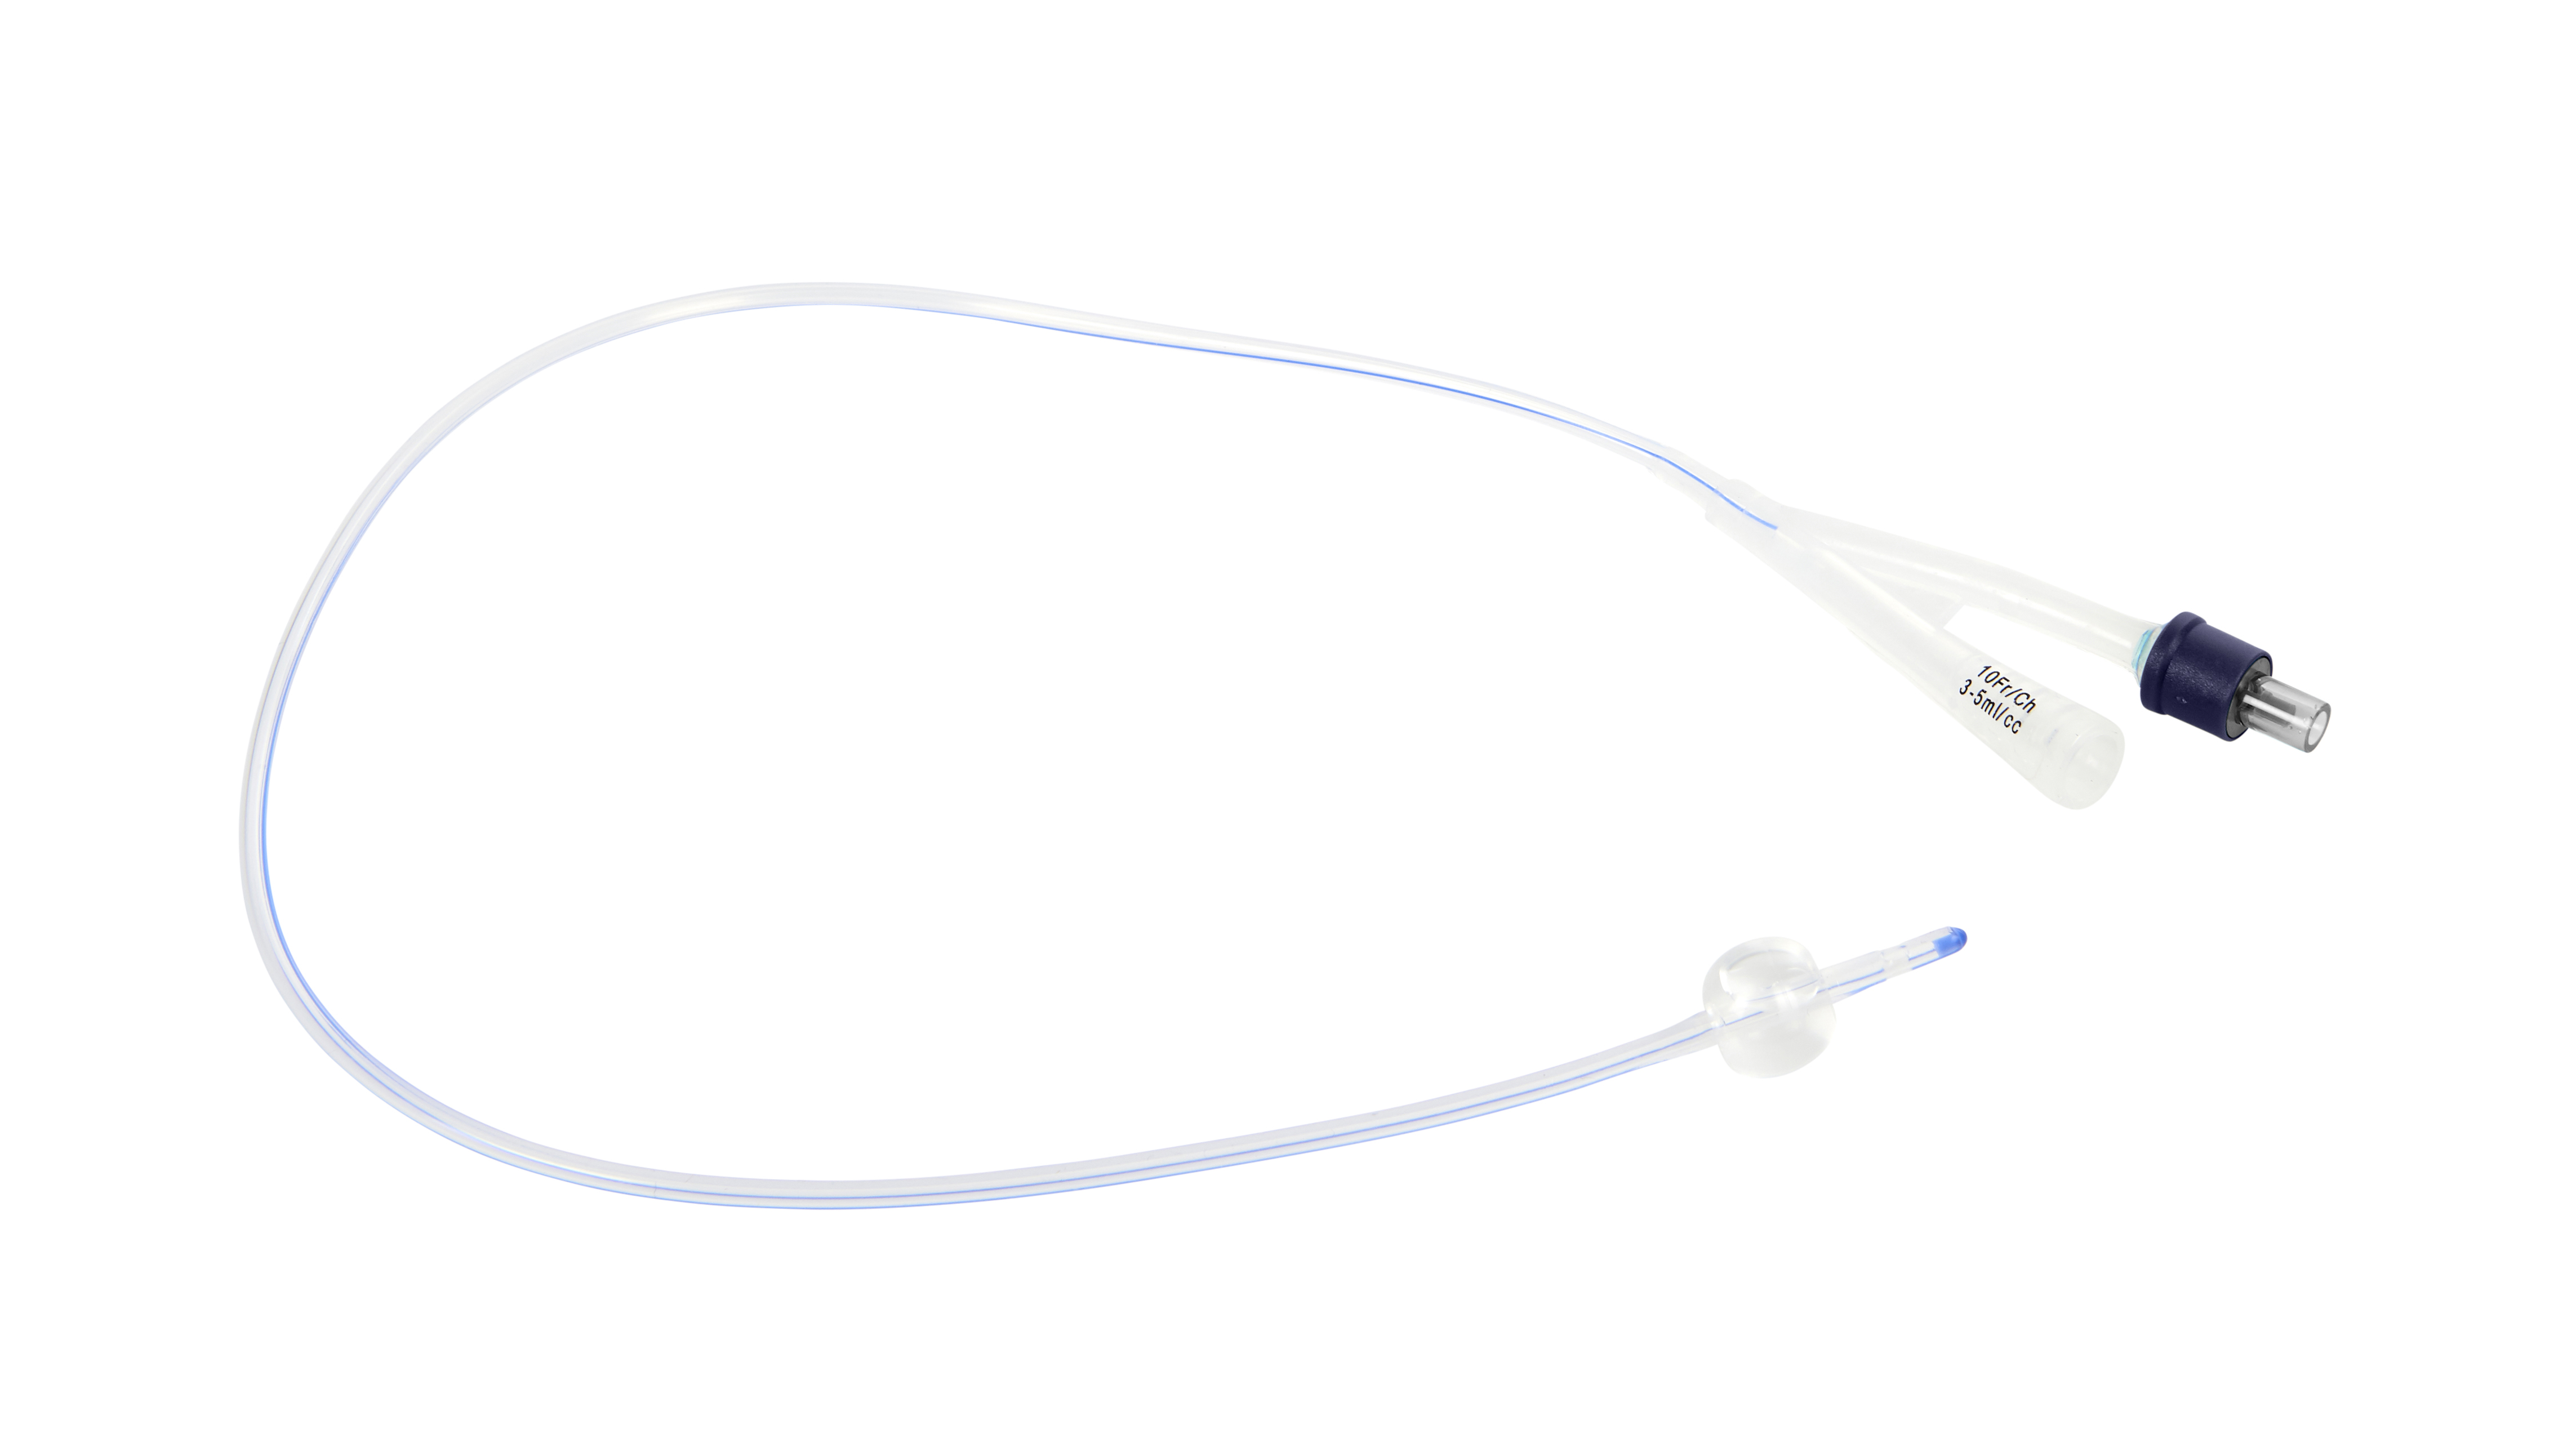 BUSTER Foley Catheter, Silicone, 10 Fr x 22”, 3.3 mm x 55 cm, 5/pk
